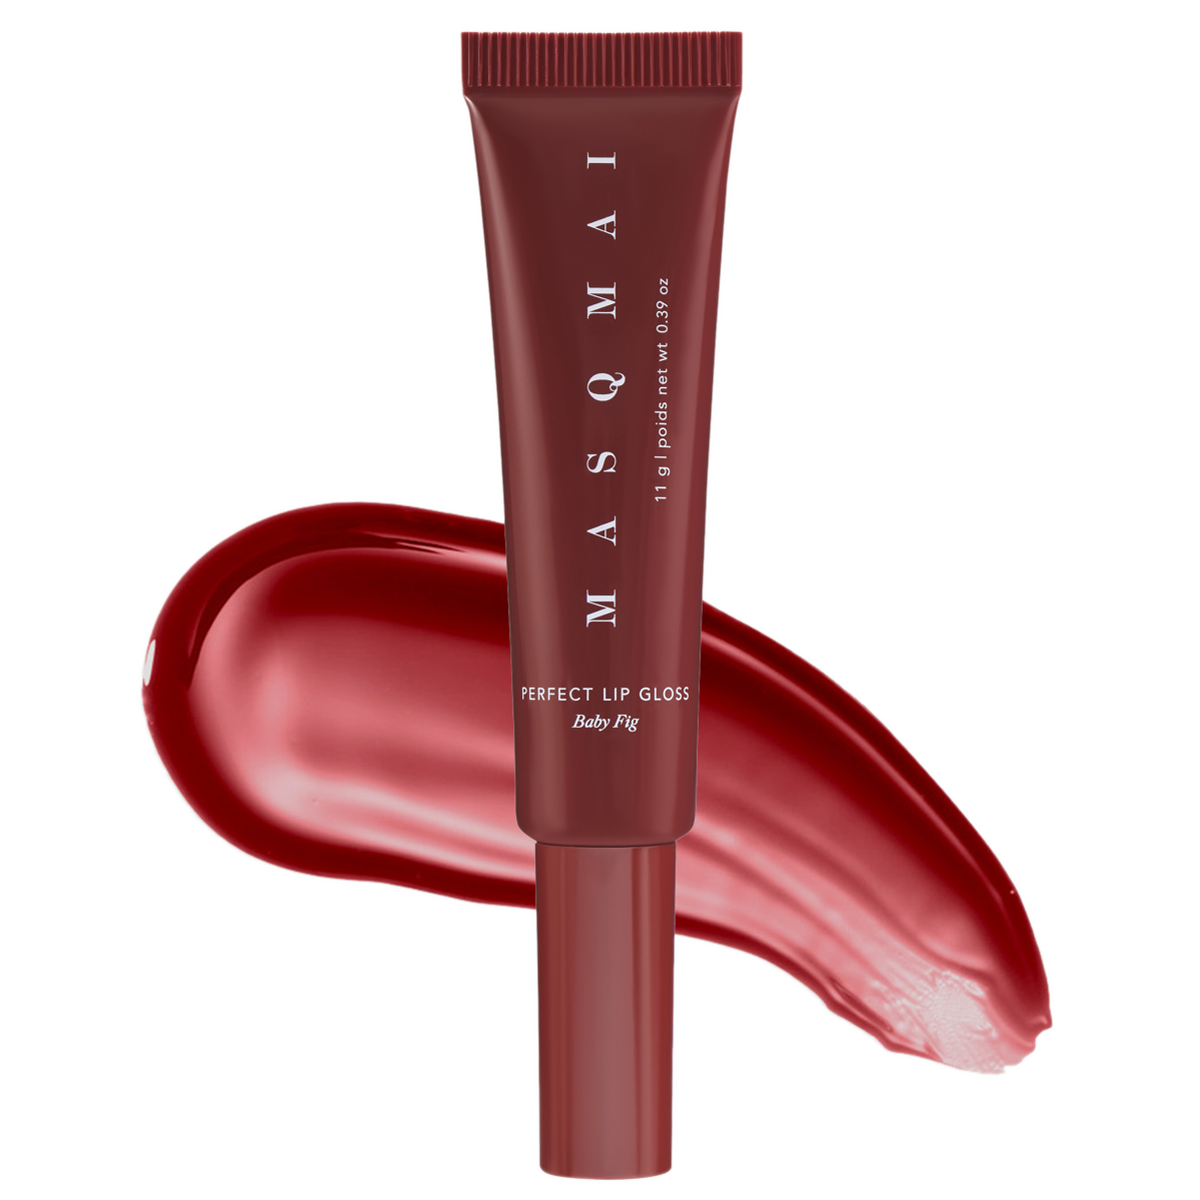 PERFECT LIP GLOSS BABY FIG